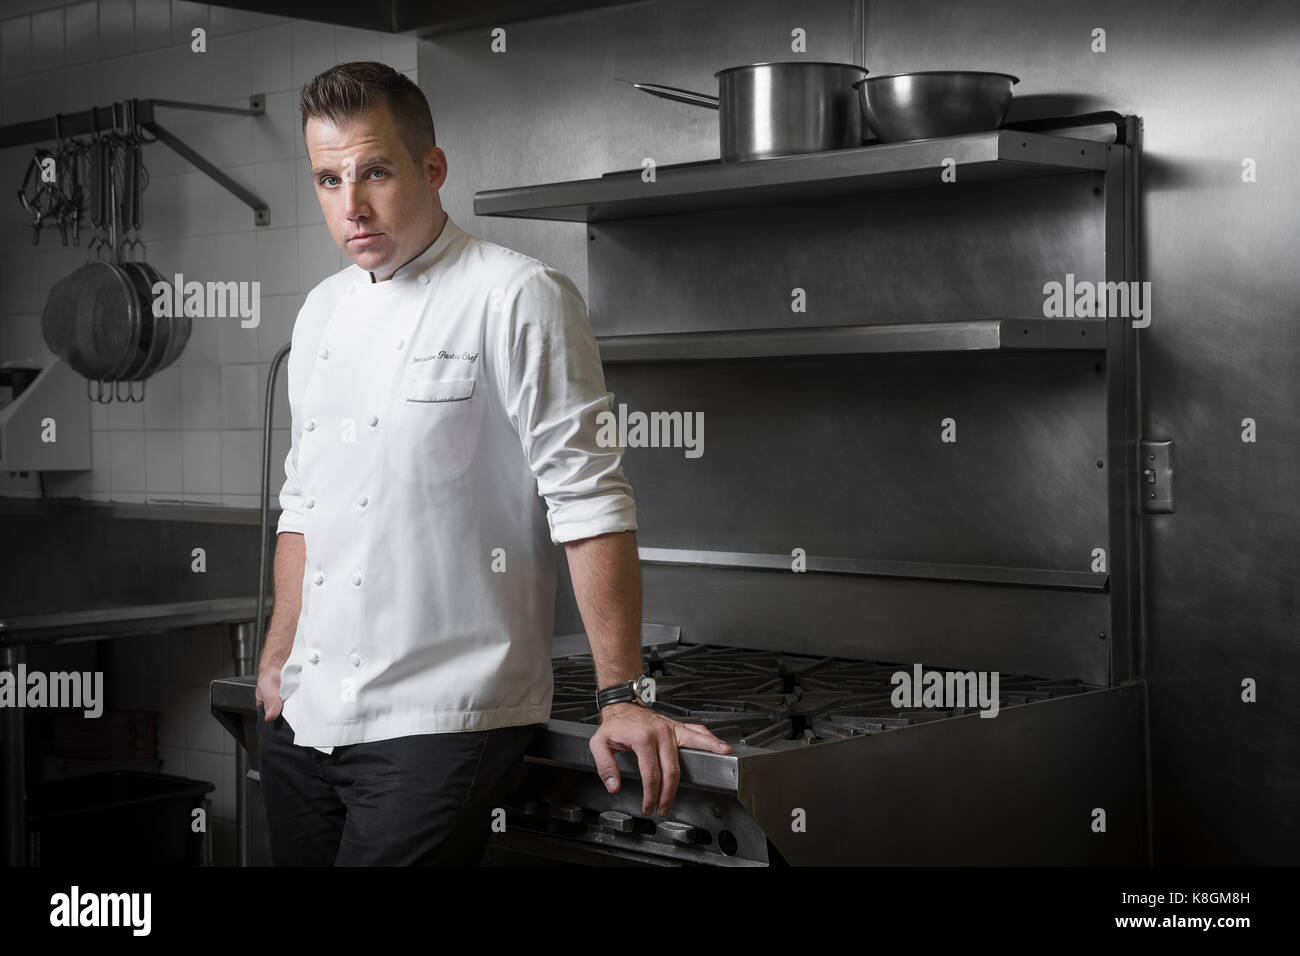 Portrait of pastry chef leaning against hob in kitchen Stock Photo